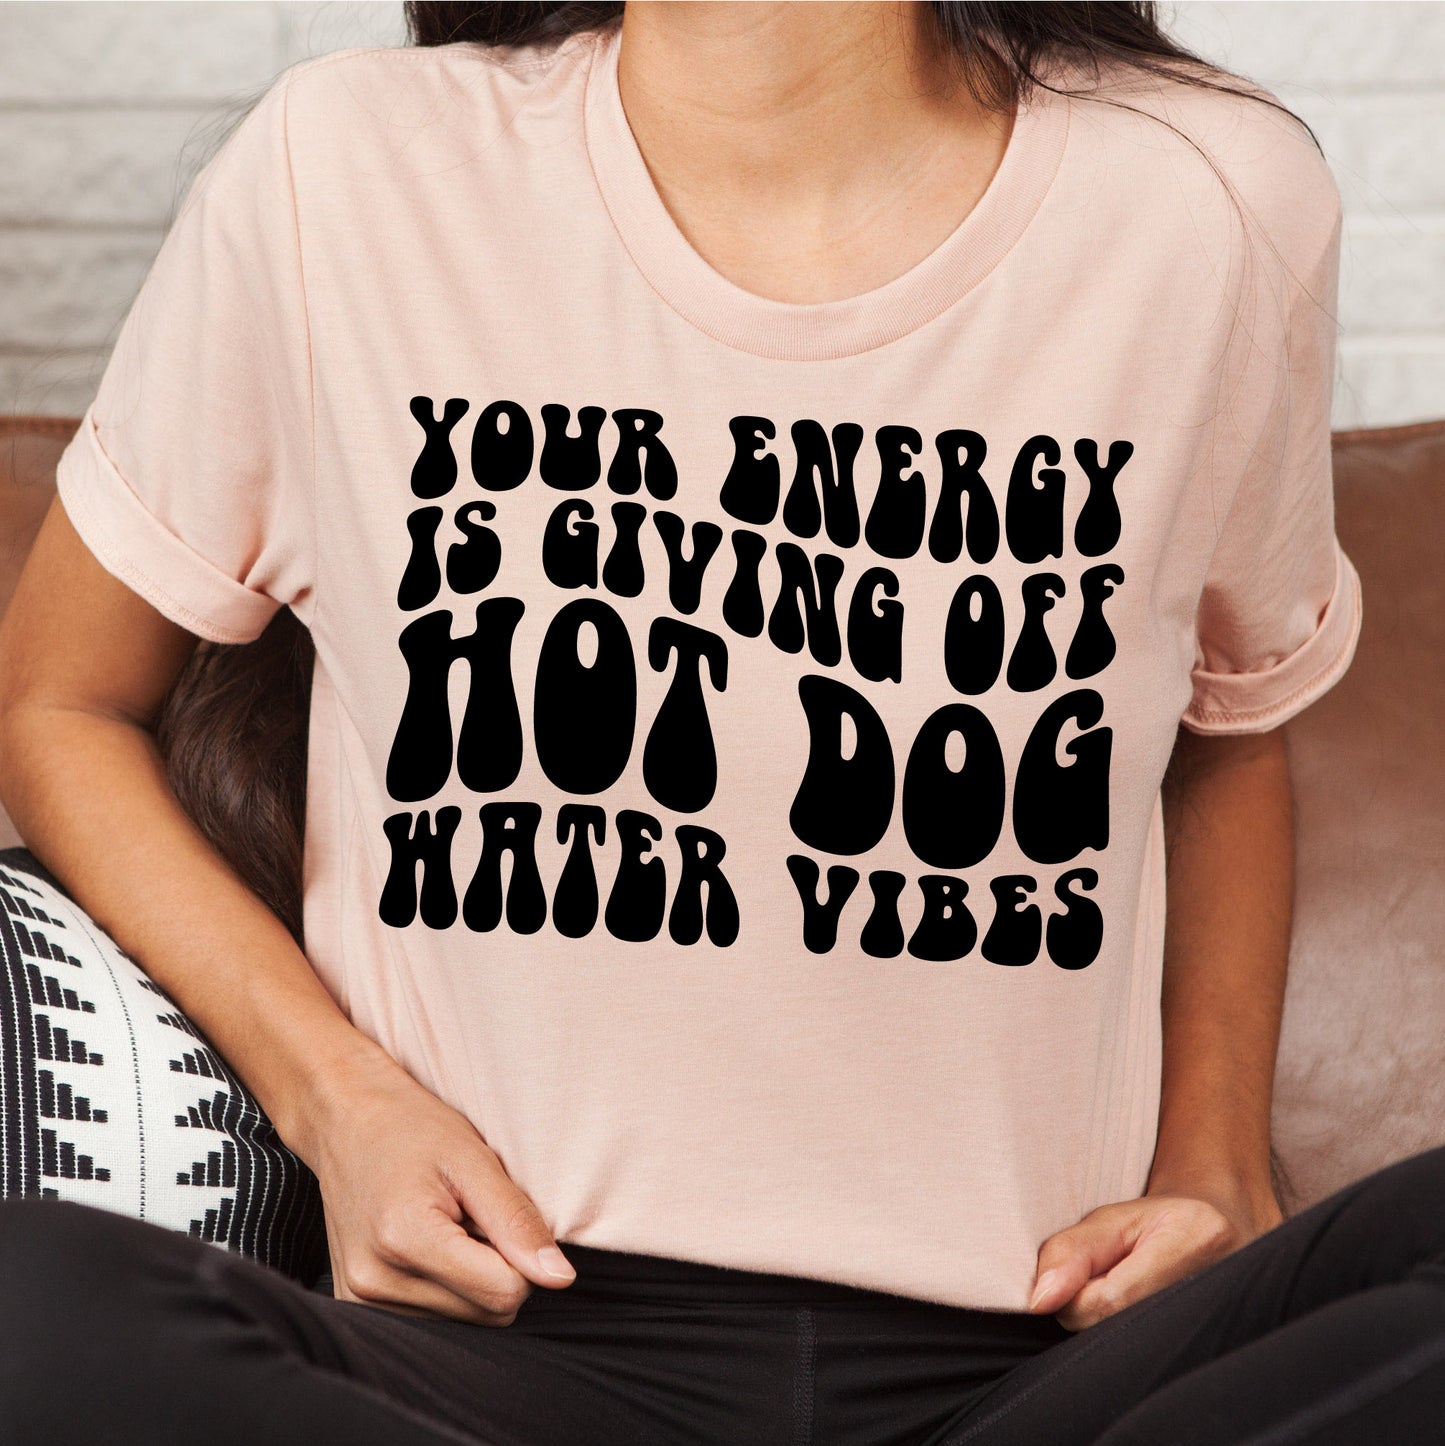 Your Energy is Giving Off Hot Dog Water Vibes- Single Color (black)- 11" wide Plastisol Screen Print Transfer